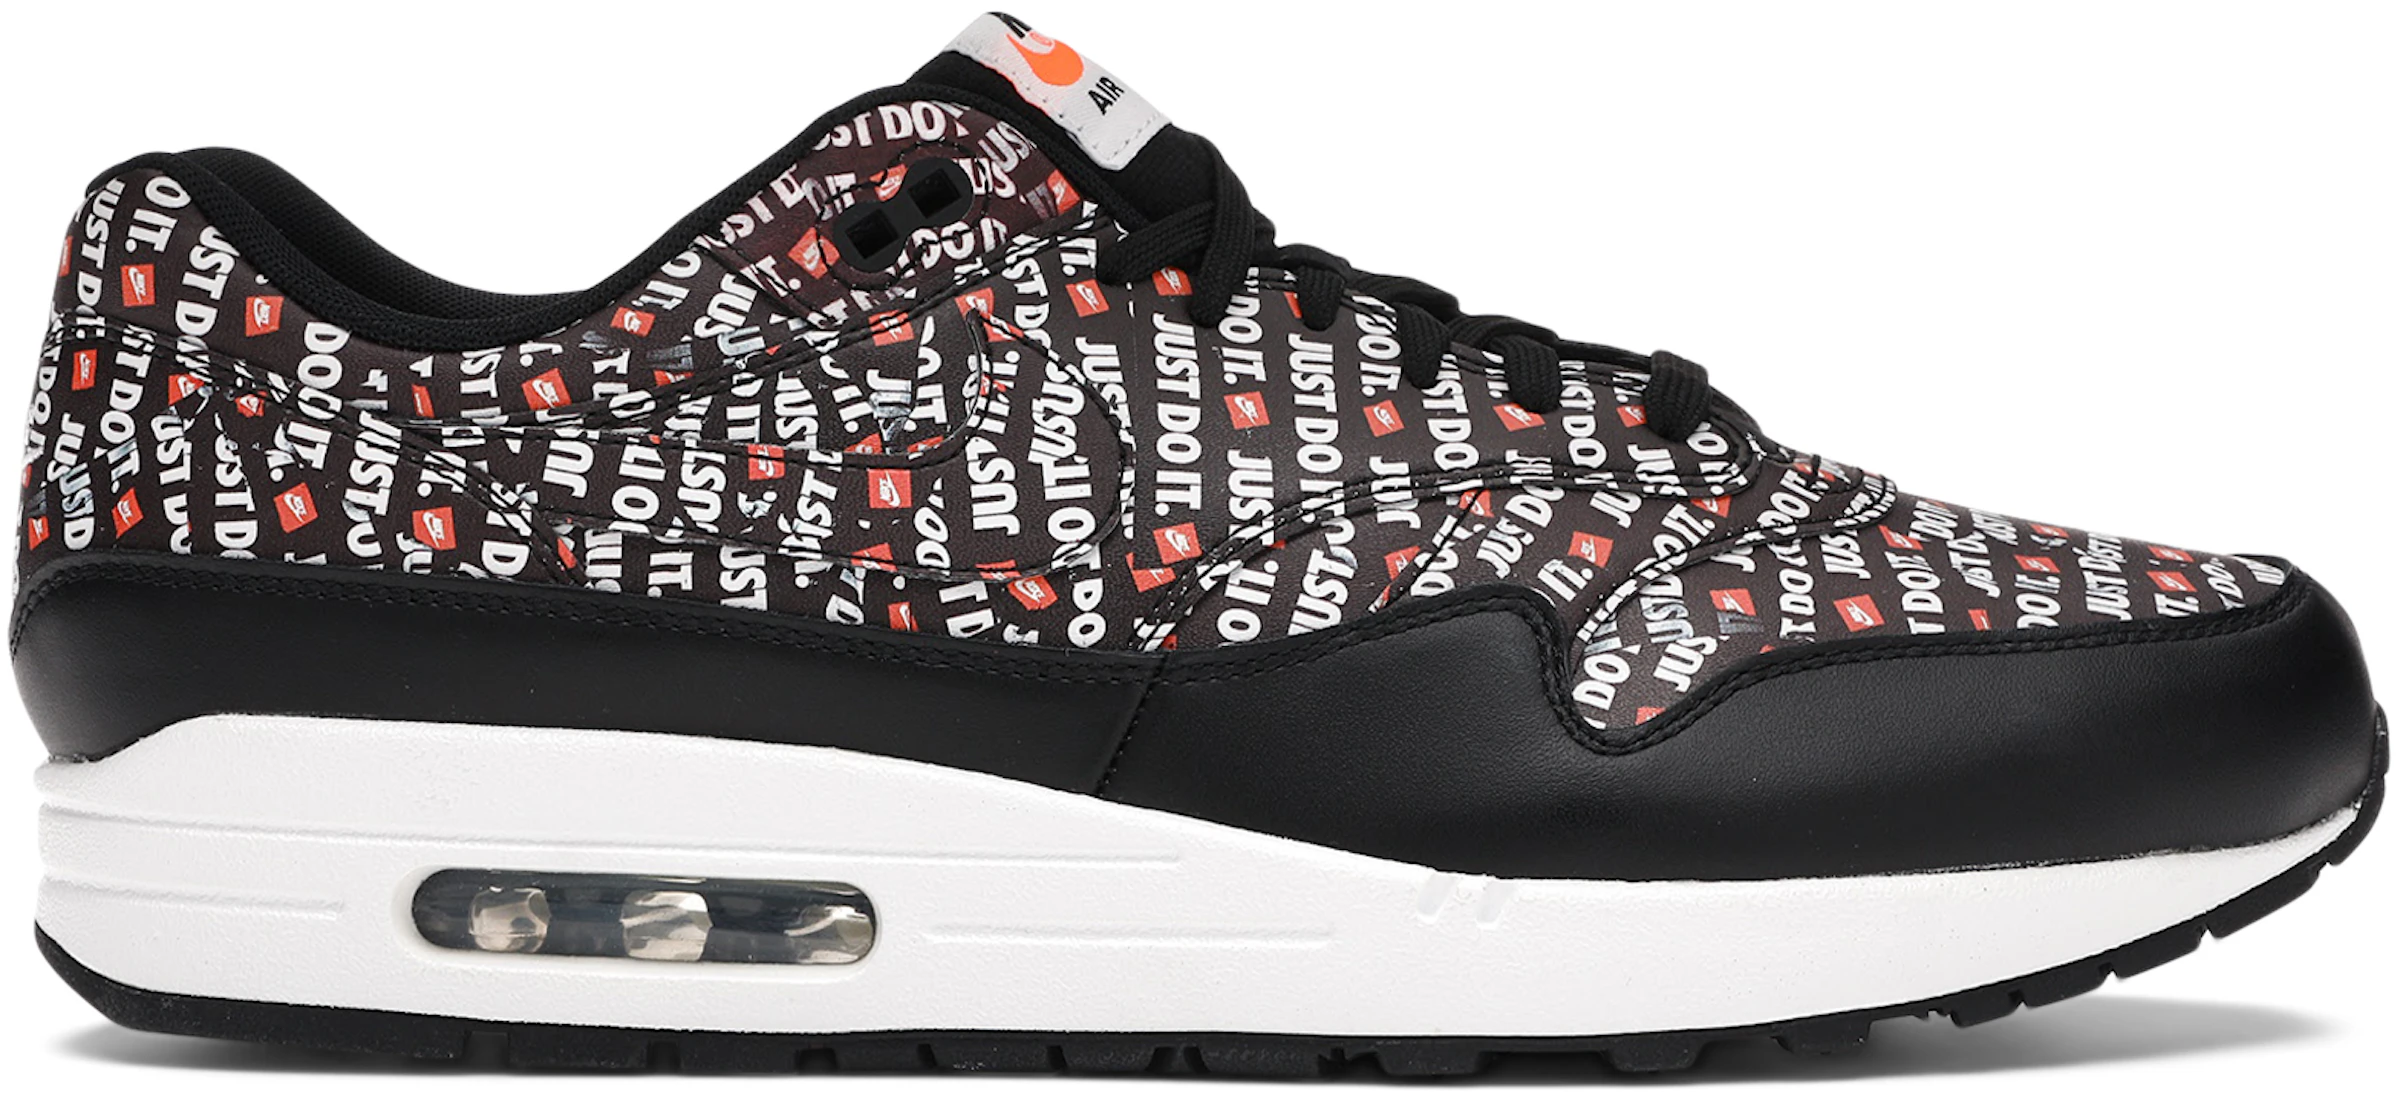 Nike Air Max Just Do It Pack Black - - US